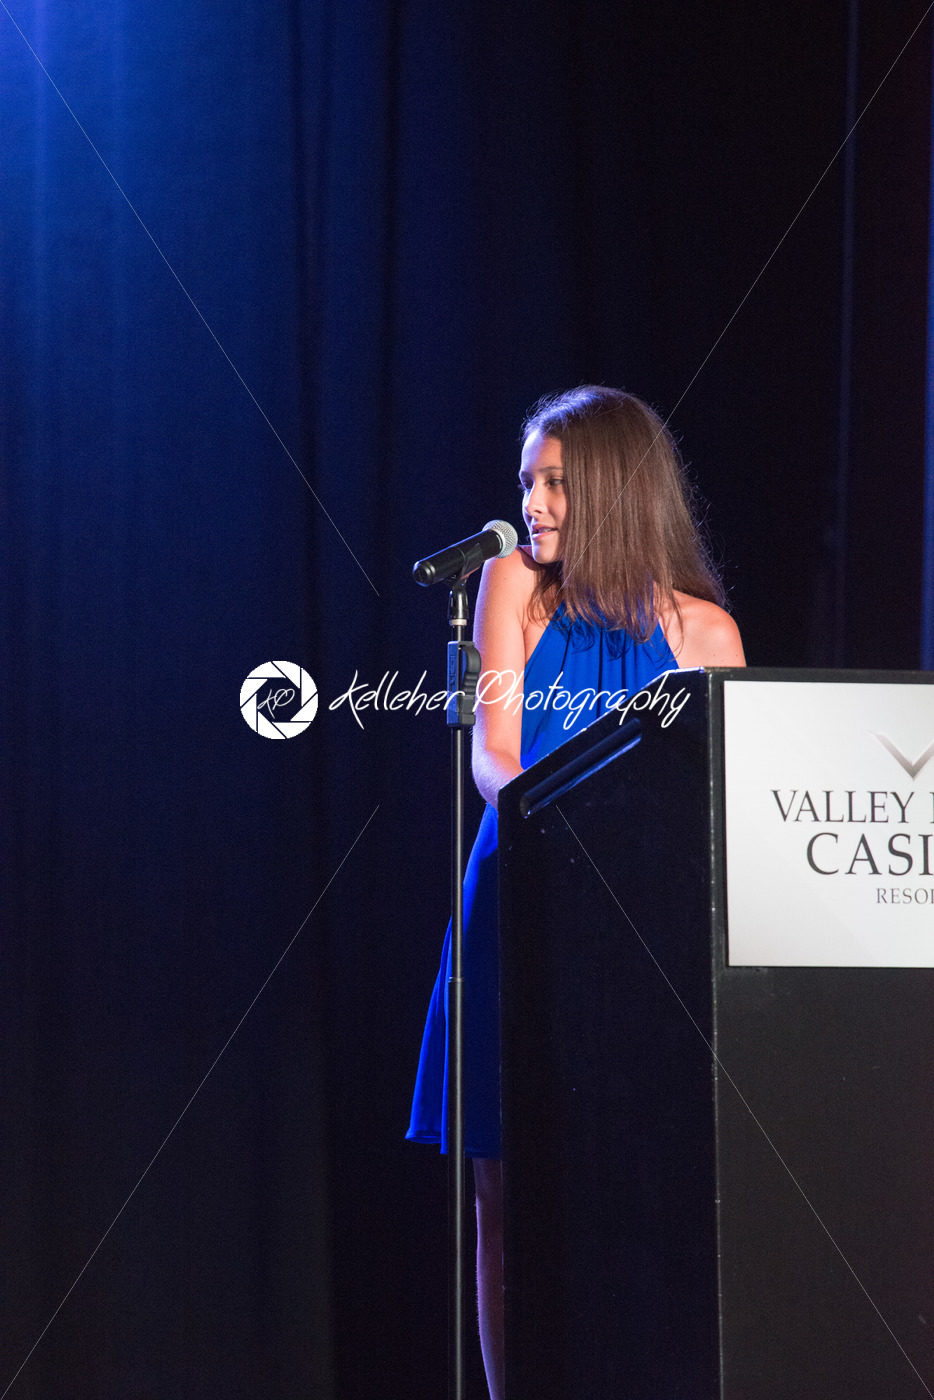 VALLEY FORGE CASINO, KING OF PRUSSIA, PA – JULY 15: Kendall speaking at Kendall’s Crusade fundraising event to raise awareness of Arteriovenus Malformations AVM on July 15, 2017 - Kelleher Photography Store